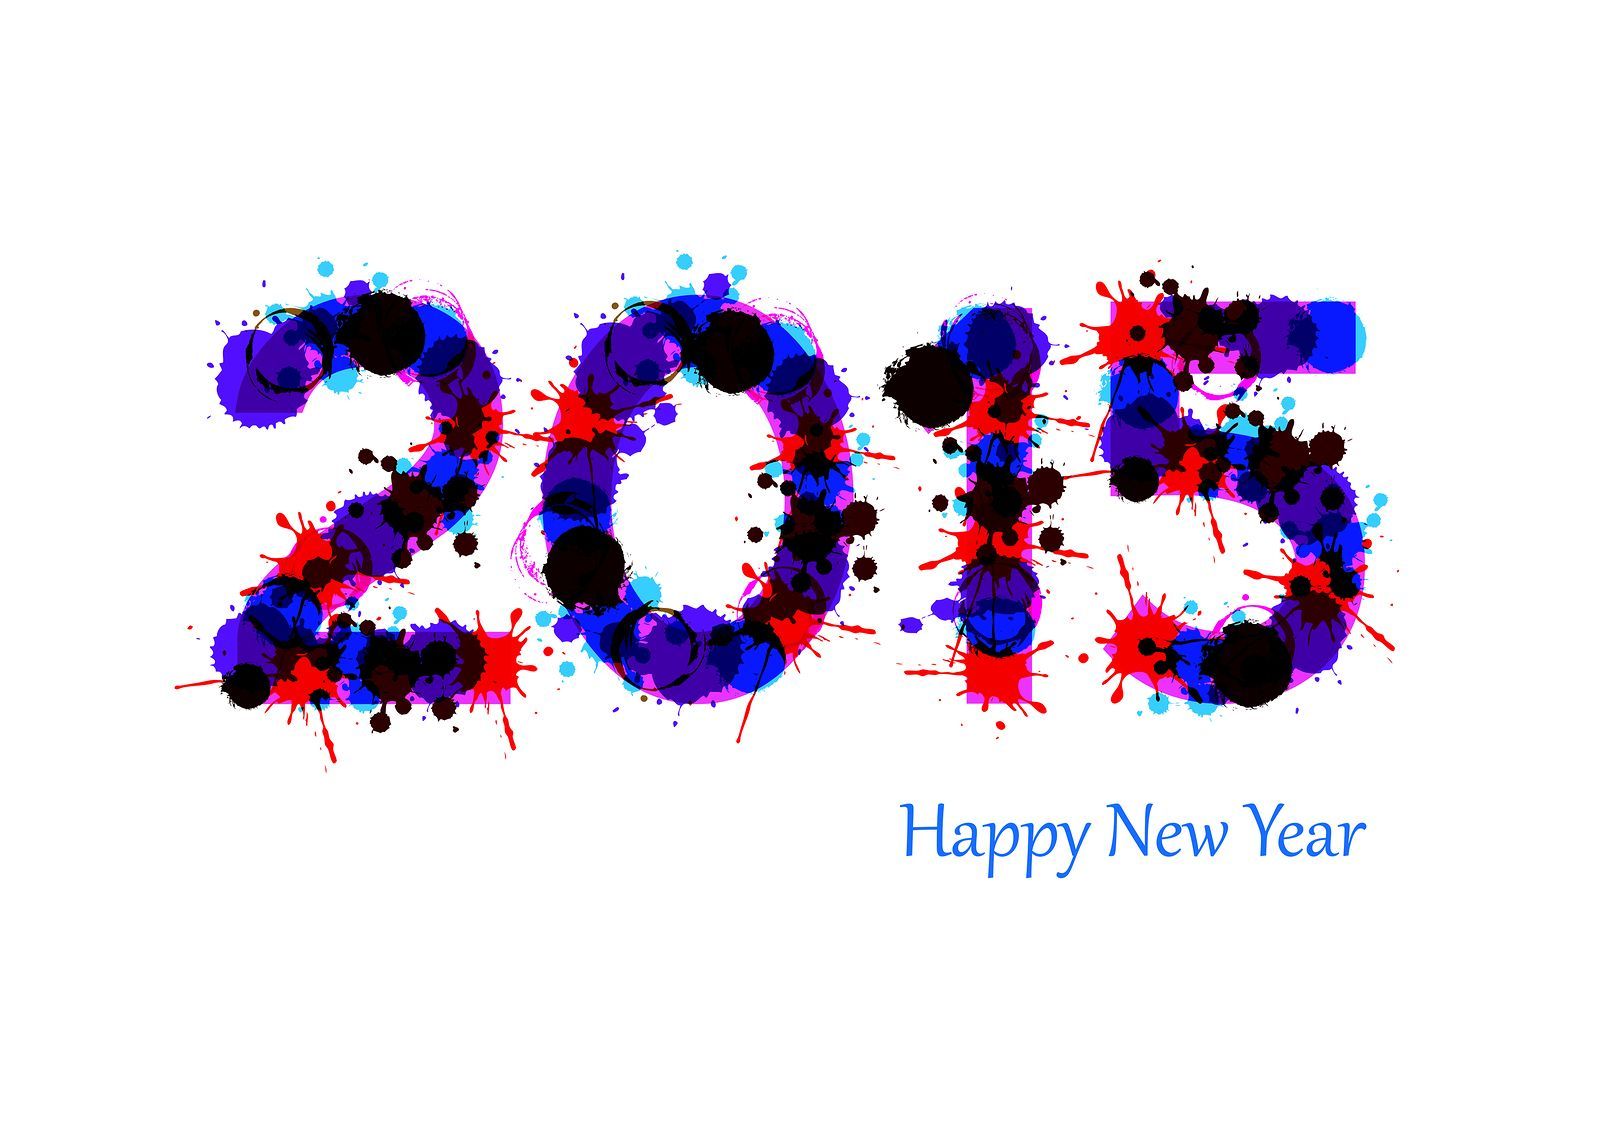 Best 3D Happy New Year Wallpapers - Download Here | Techbeasts